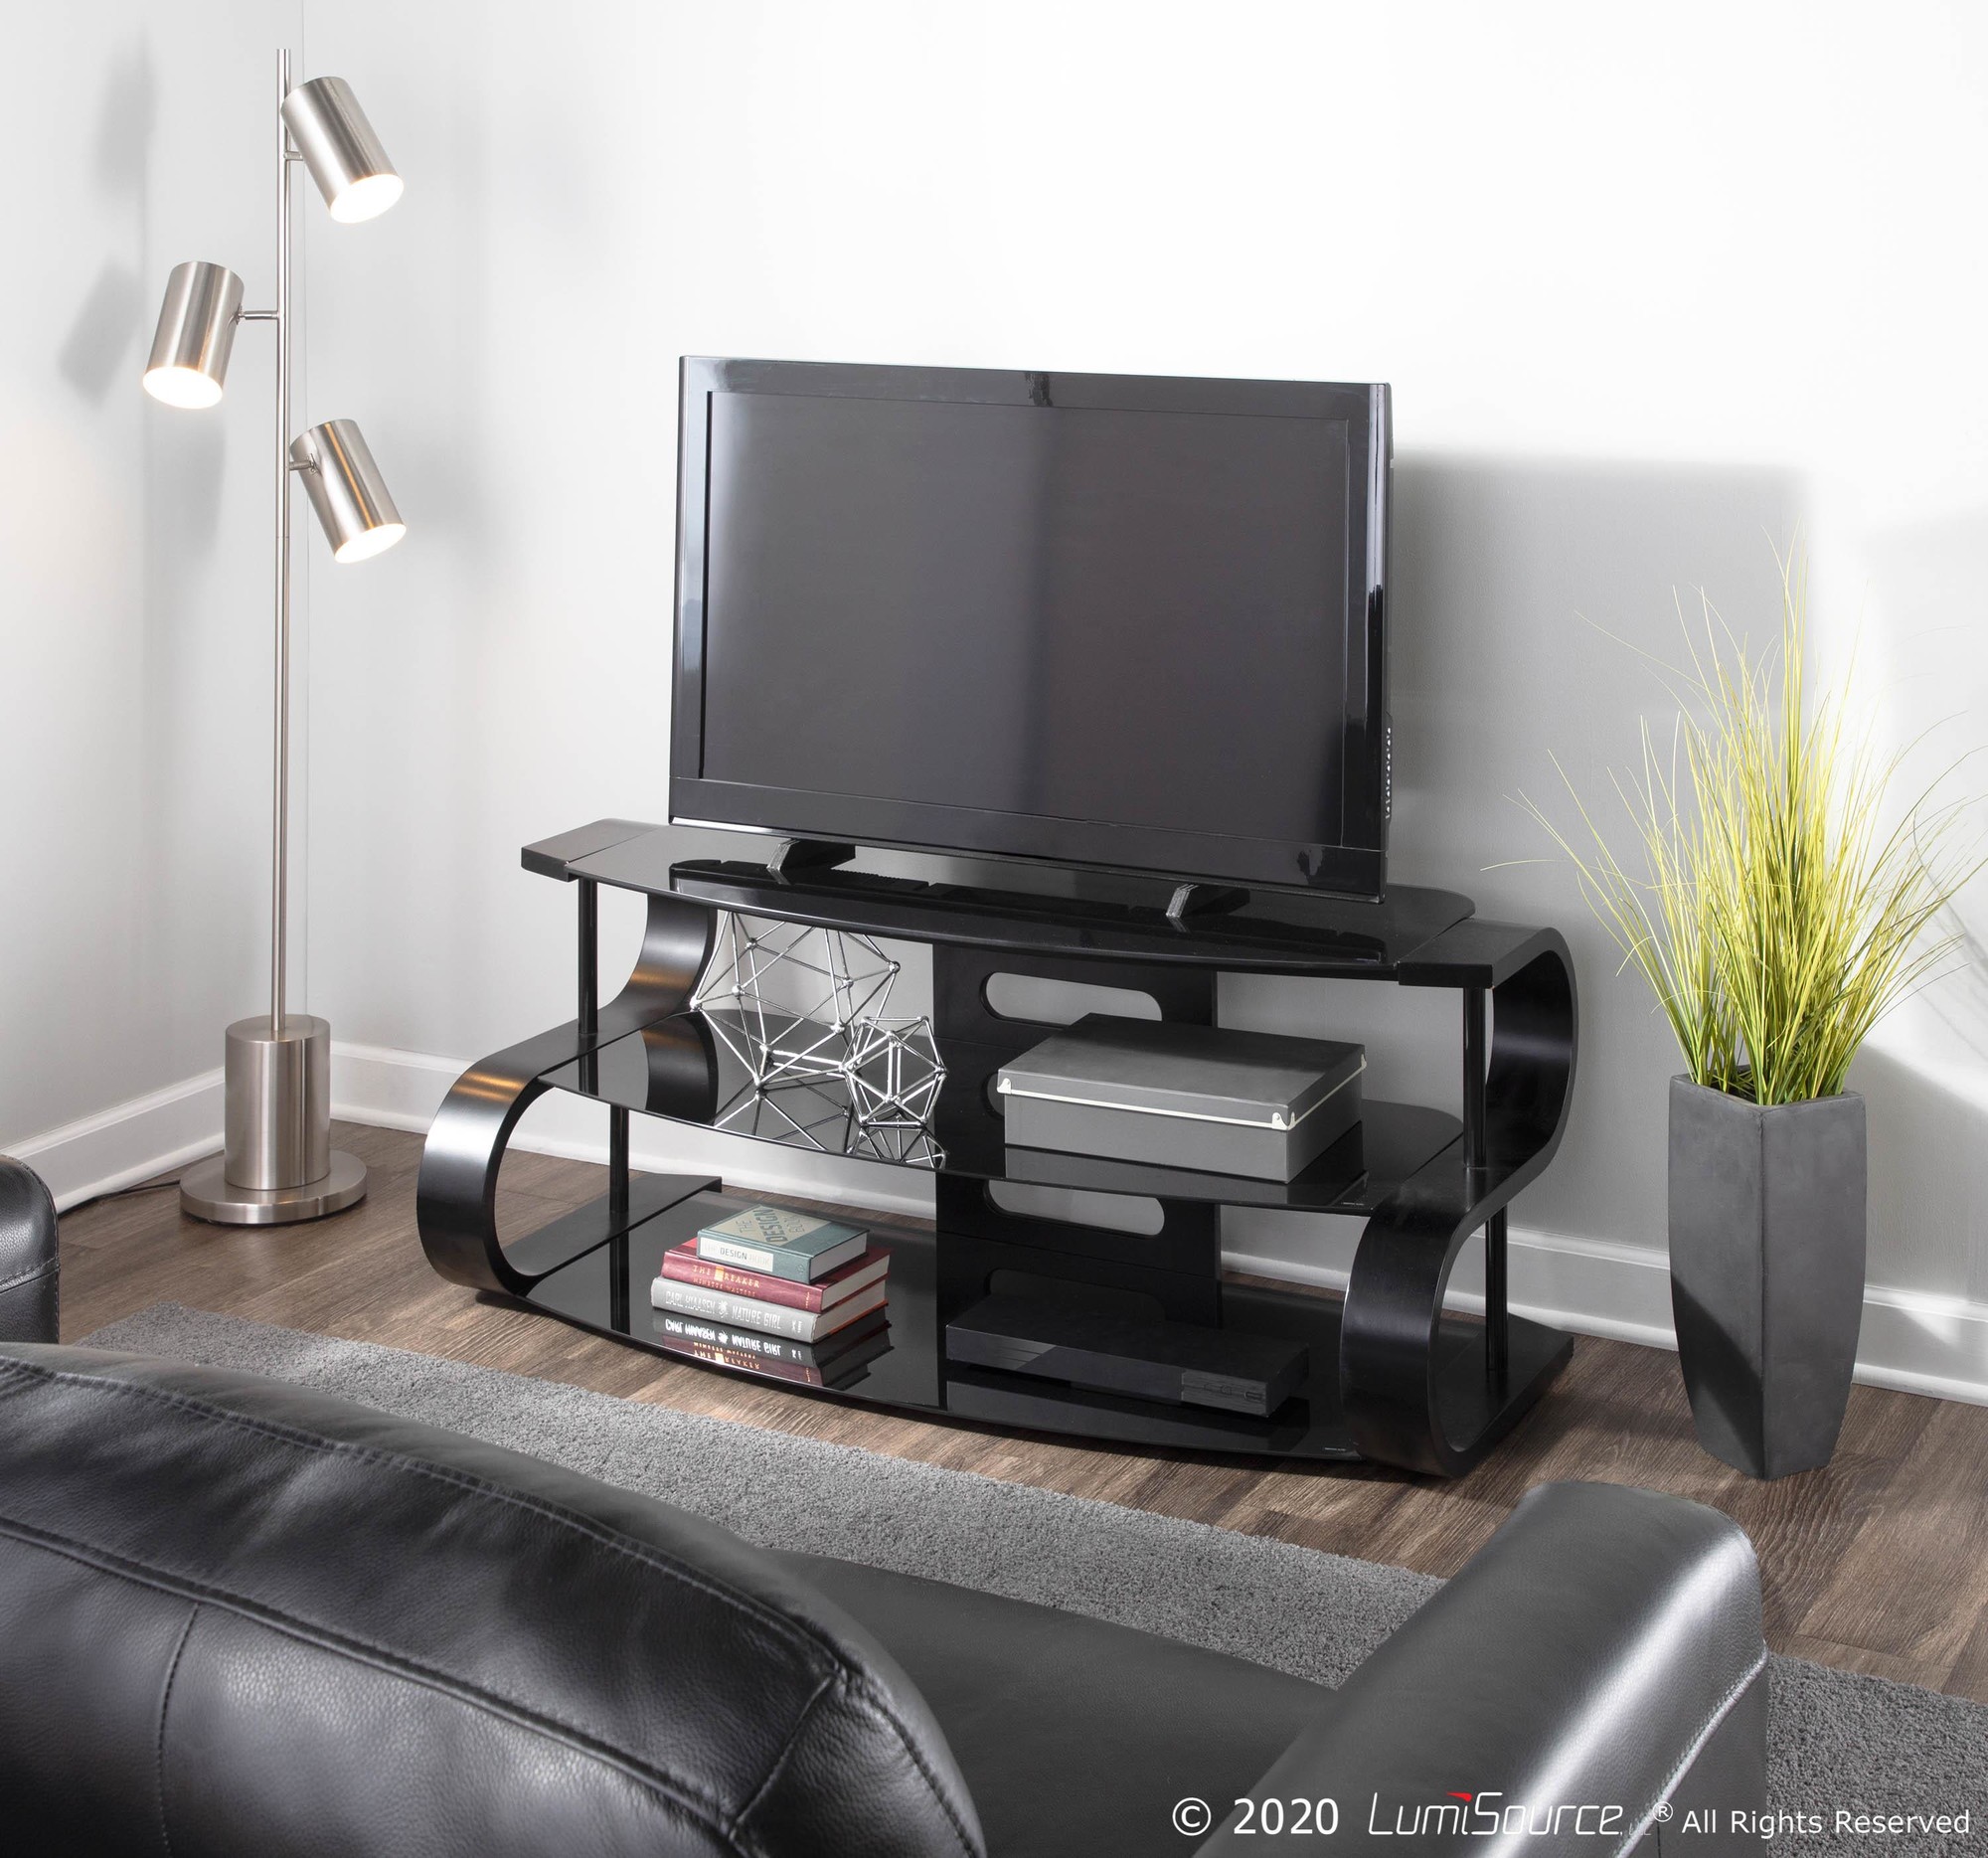 Stylish Tv Prices 120 Affordable LumiSource Metro Stand at Decor - -